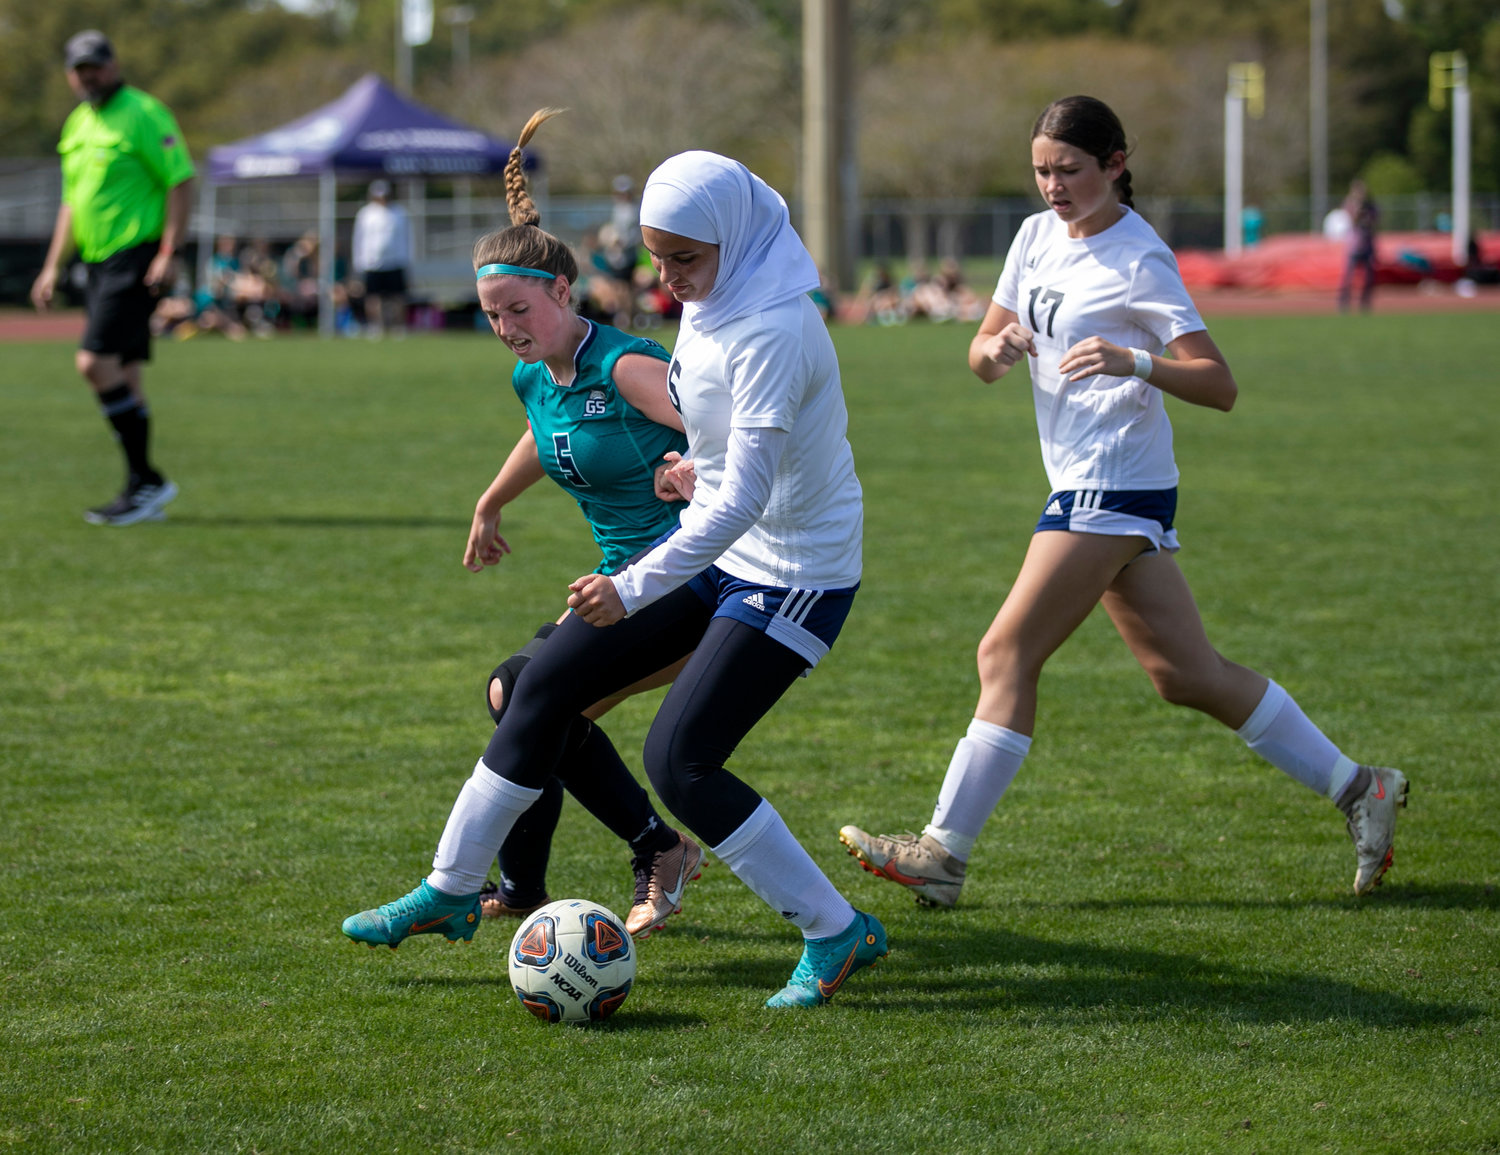 Dolphin senior Calista Sweet battles Baker junior Sarah Shabaneh for positioning in the second half of the girls’ gold final Saturday, March 11, at the Gulf Shores Sportsplex during the Island Cup tournament. The Hornets emerged victorious with a 2-0 win to close action.